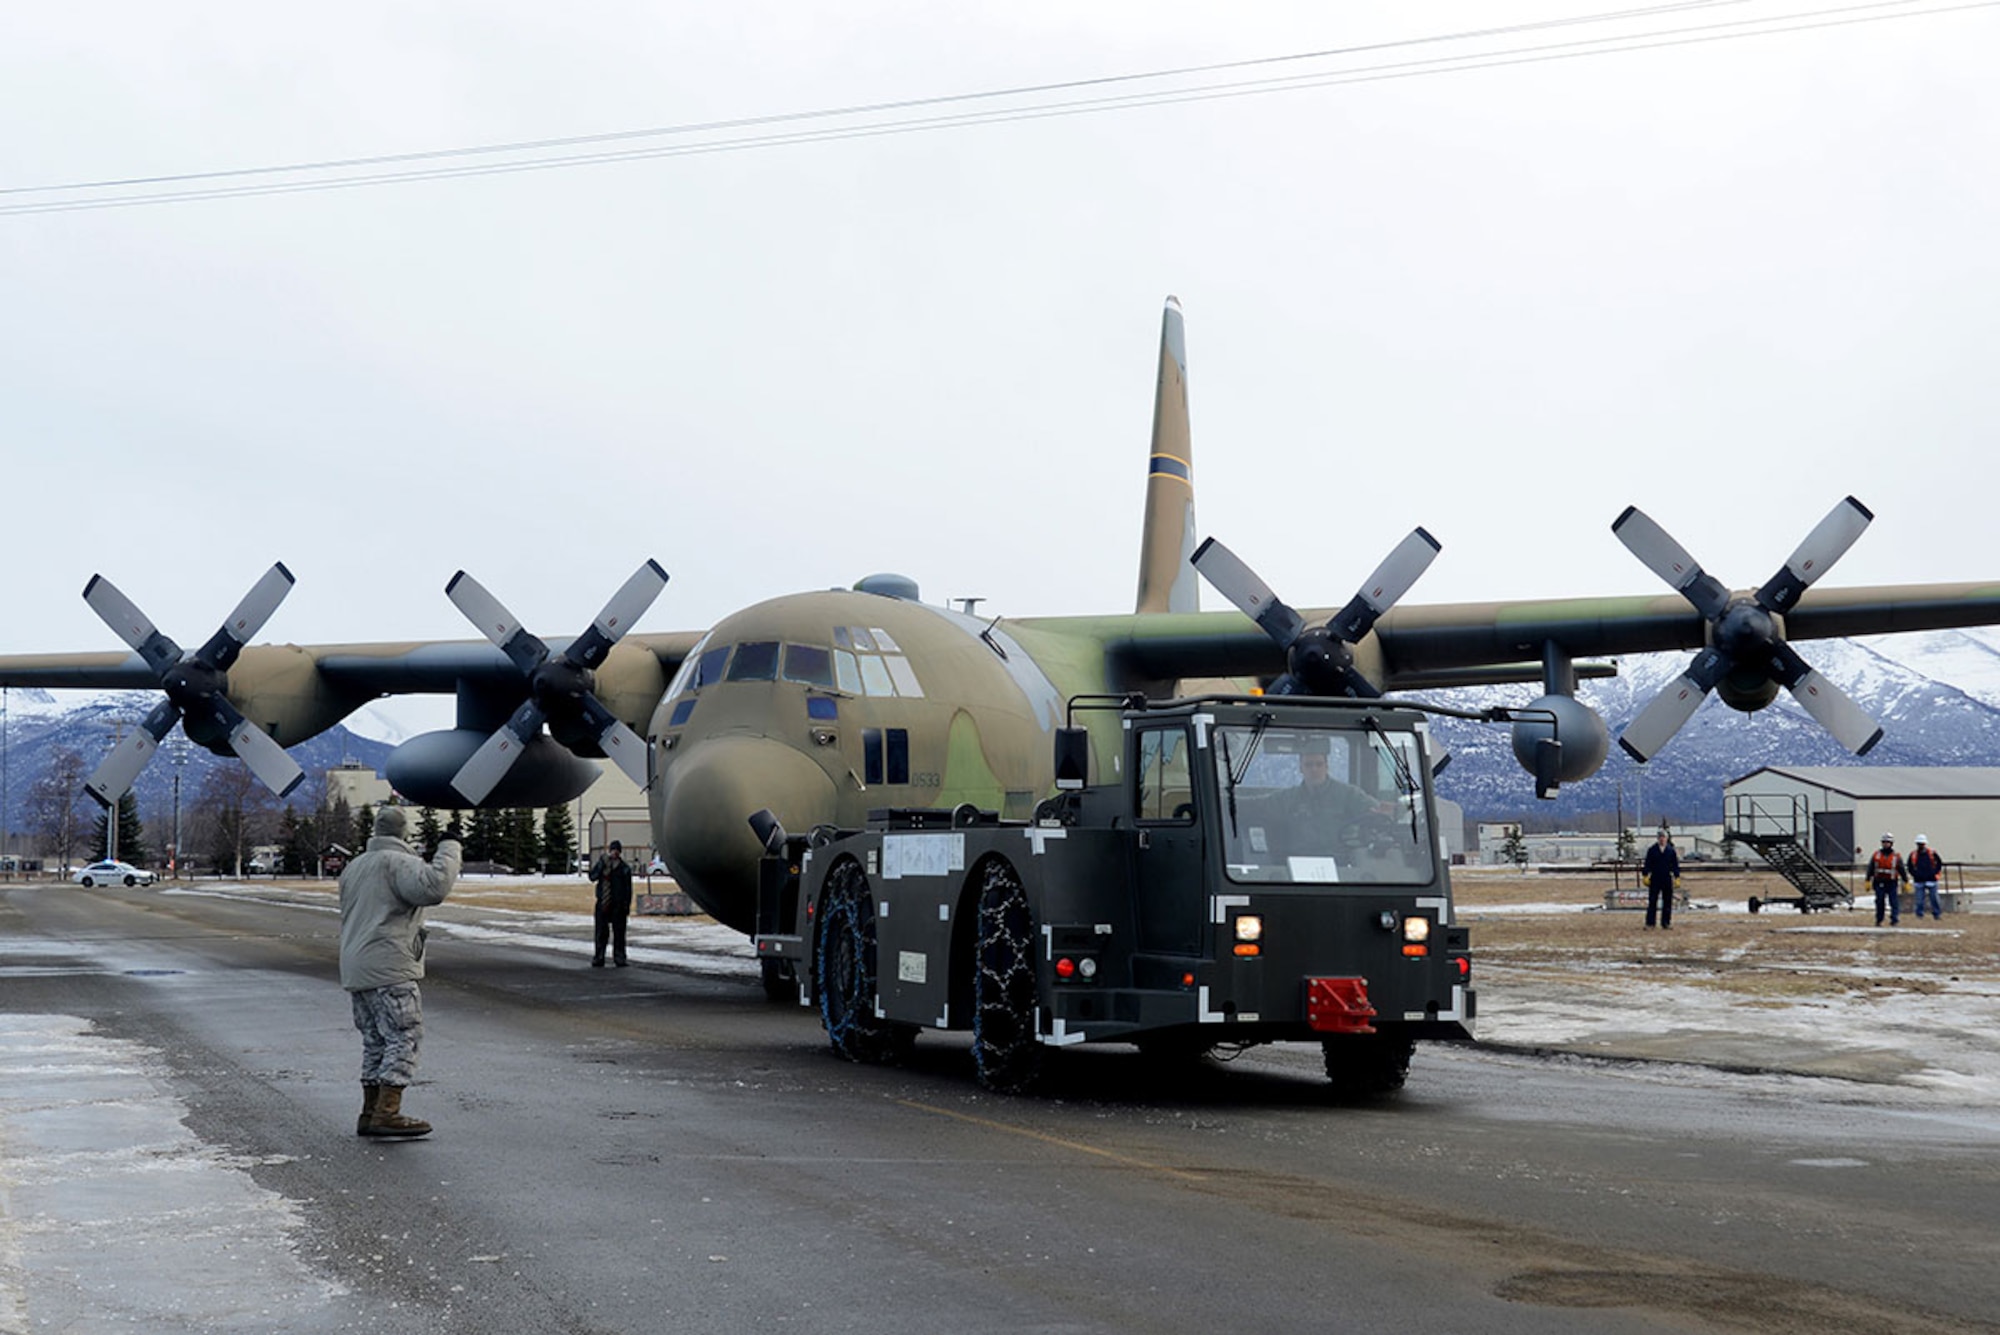 Airmen and contracted personnel work together to tow the static C-130 Hercules at Joint Base Elmendorf-Richardson Feb. 27, 2016. The aircraft was towed to Hangar 21 for refurbishment and is scheduled to return to Heritage Park in April. (U.S. Air Force photo by Airman 1st Class Christopher R. Morales)